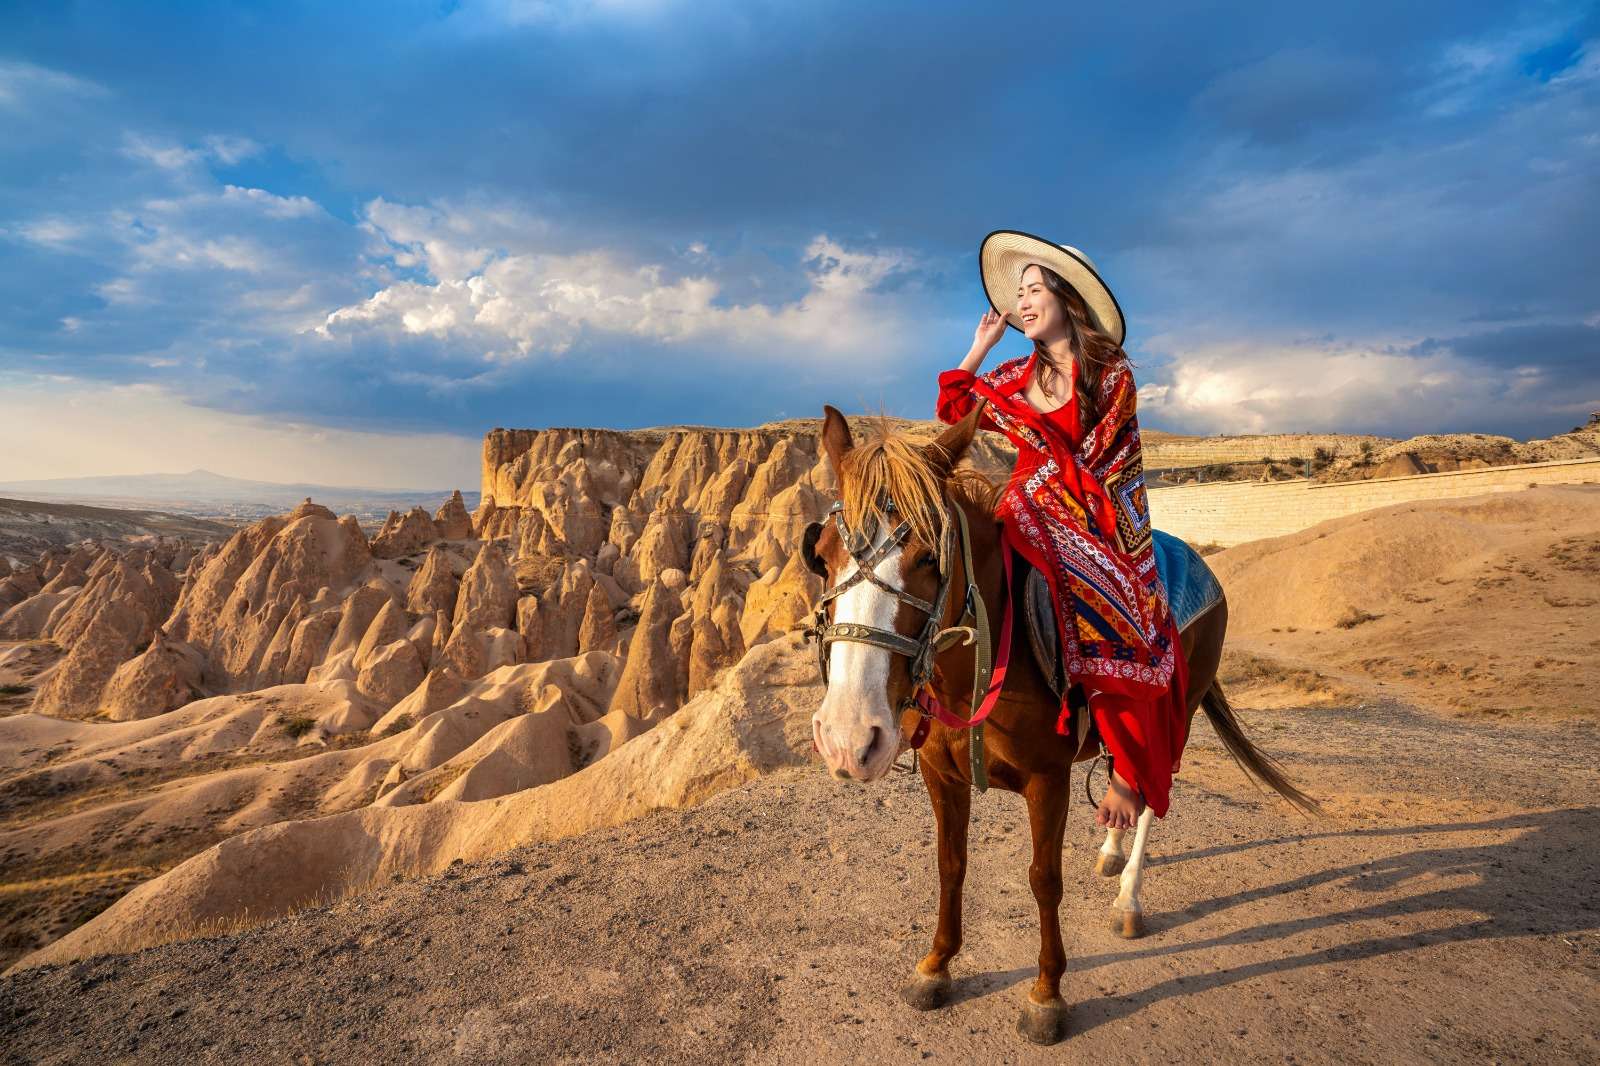 woman on the camel in desert, gcc tourism industry